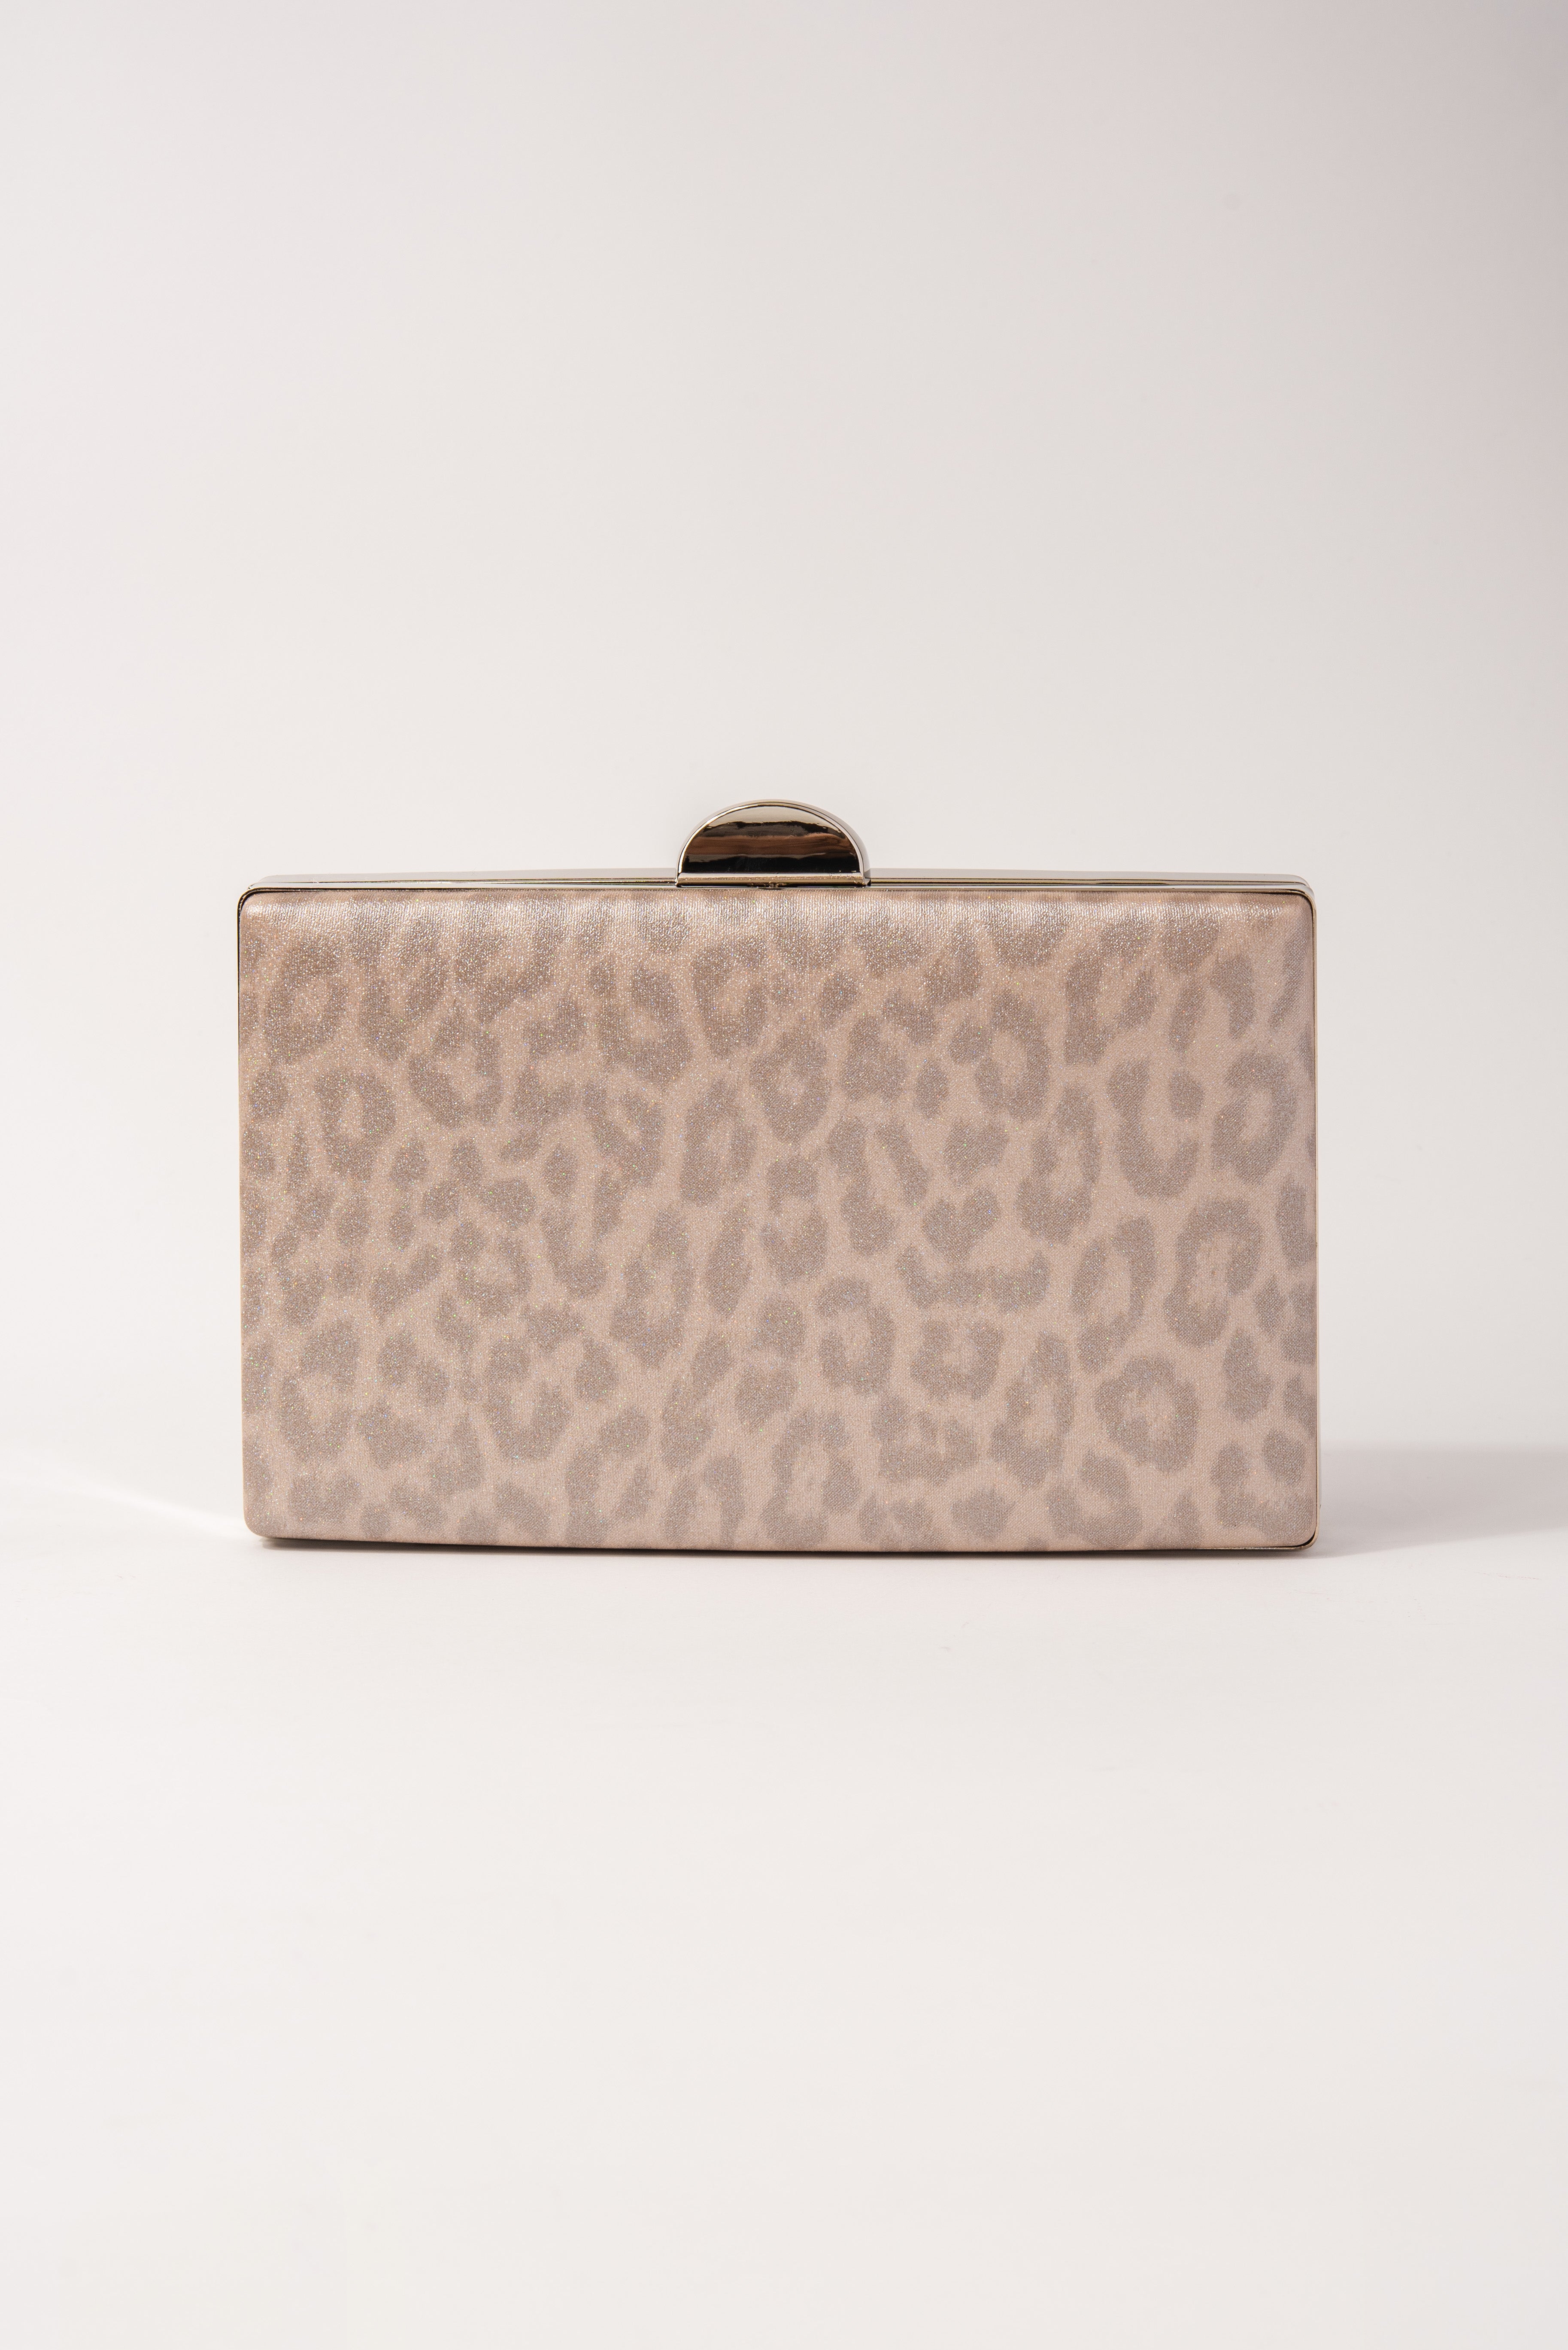 The Daily Hunt: A Timeless Leopard Print Clutch and more!